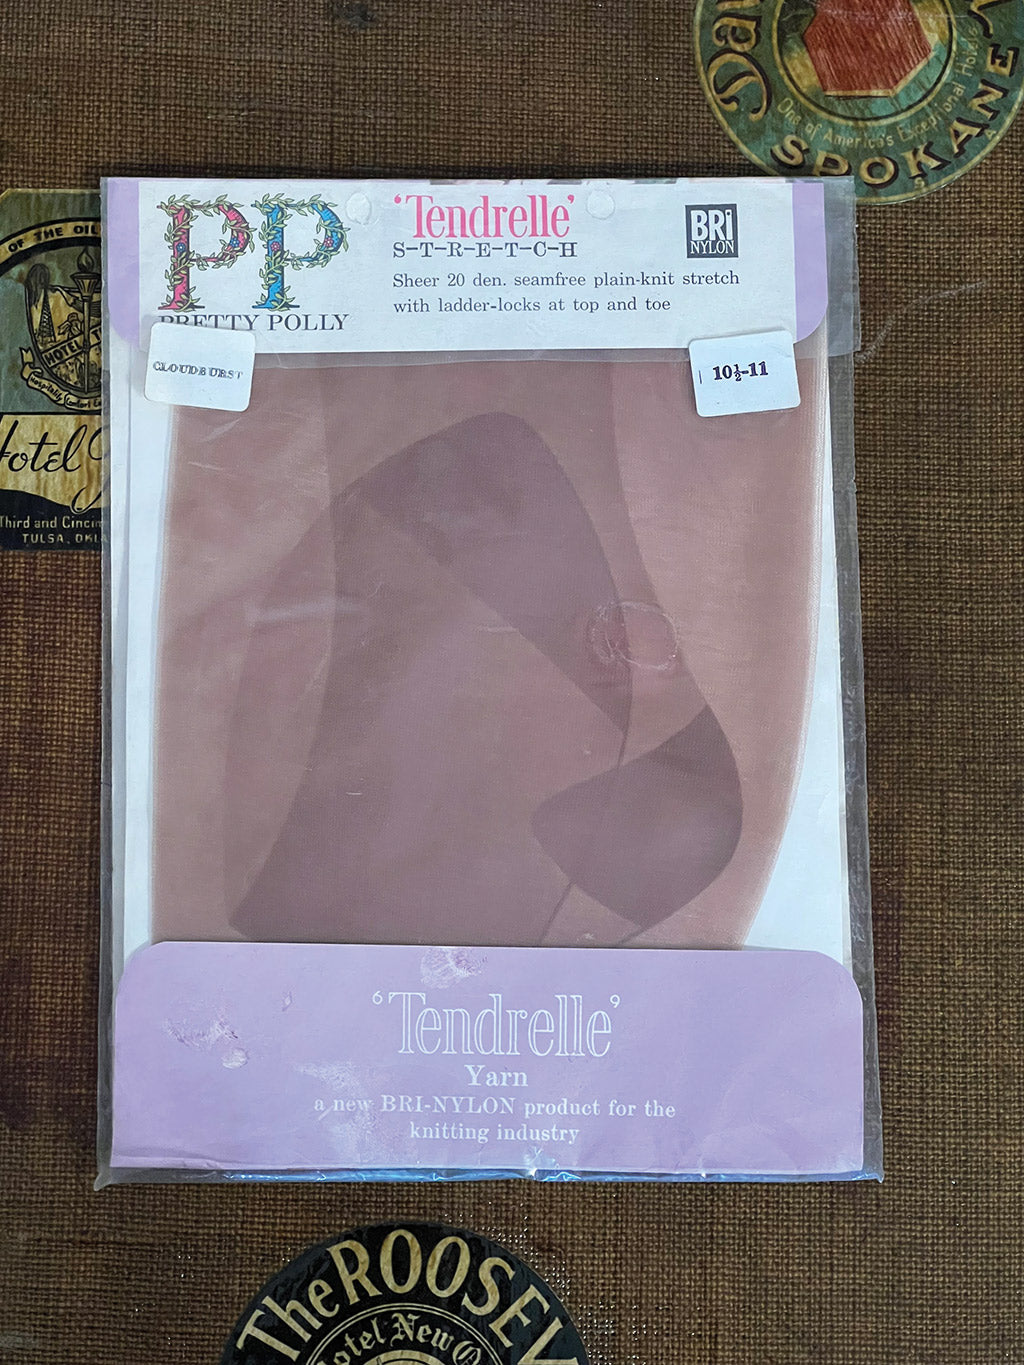 Vintage Pretty Polly Tendrelle Stockings front